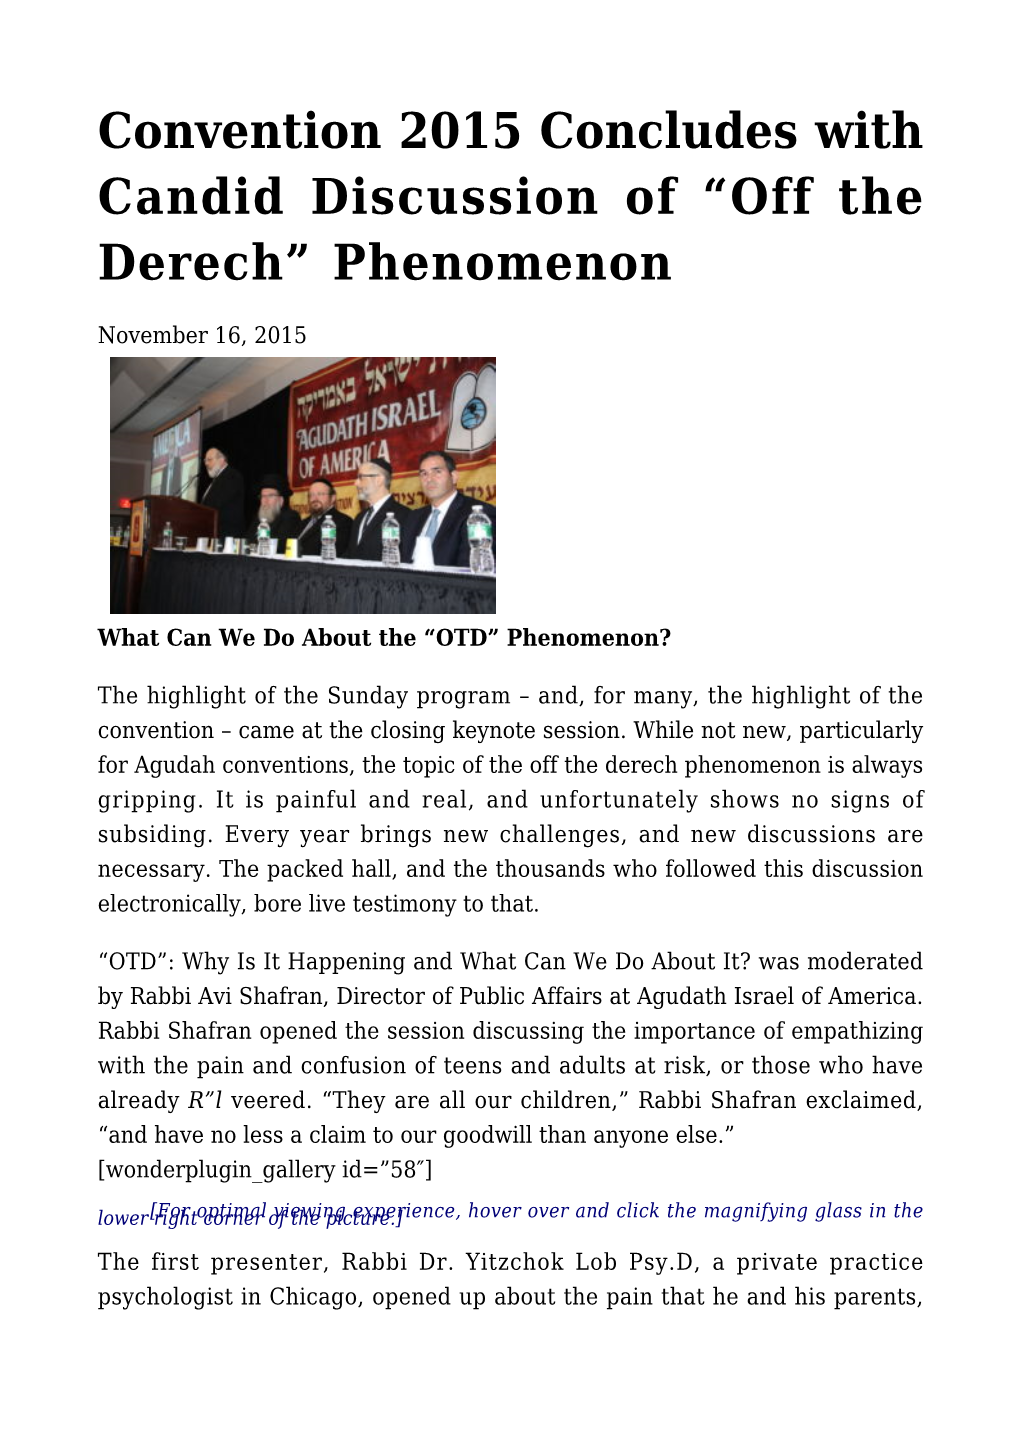 Convention 2015 Concludes with Candid Discussion of “Off the Derech” Phenomenon